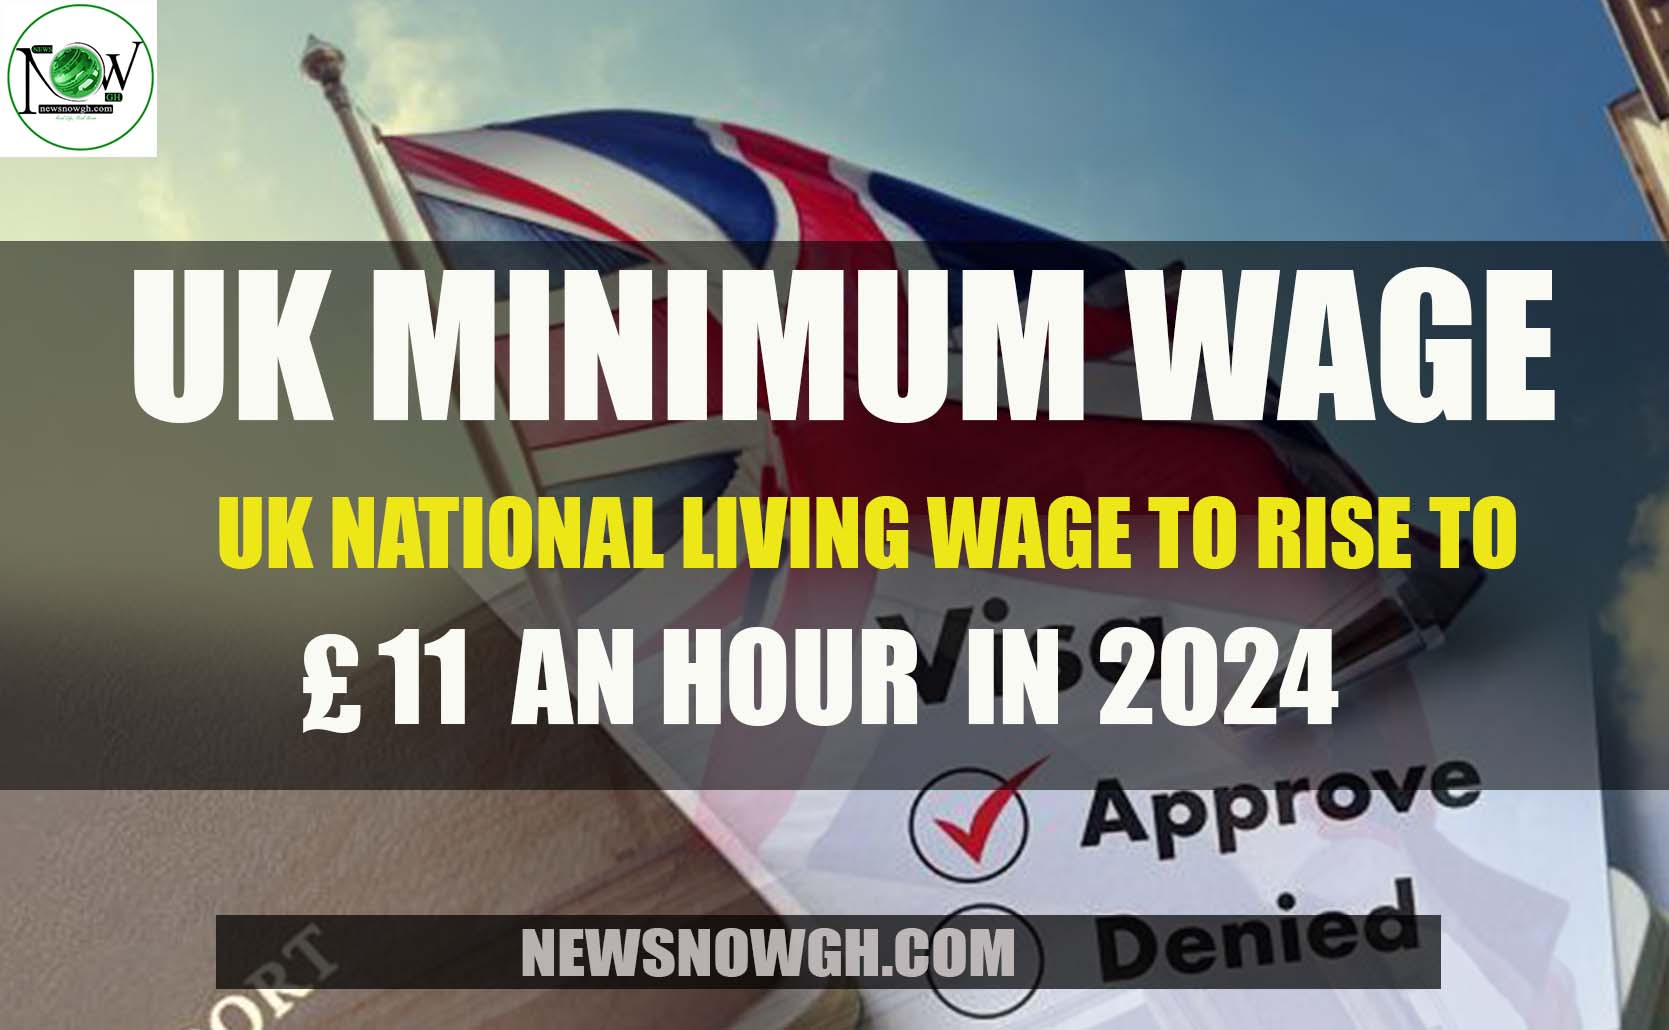 UK National Living Wage to Rise to £11 an Hour in 2024